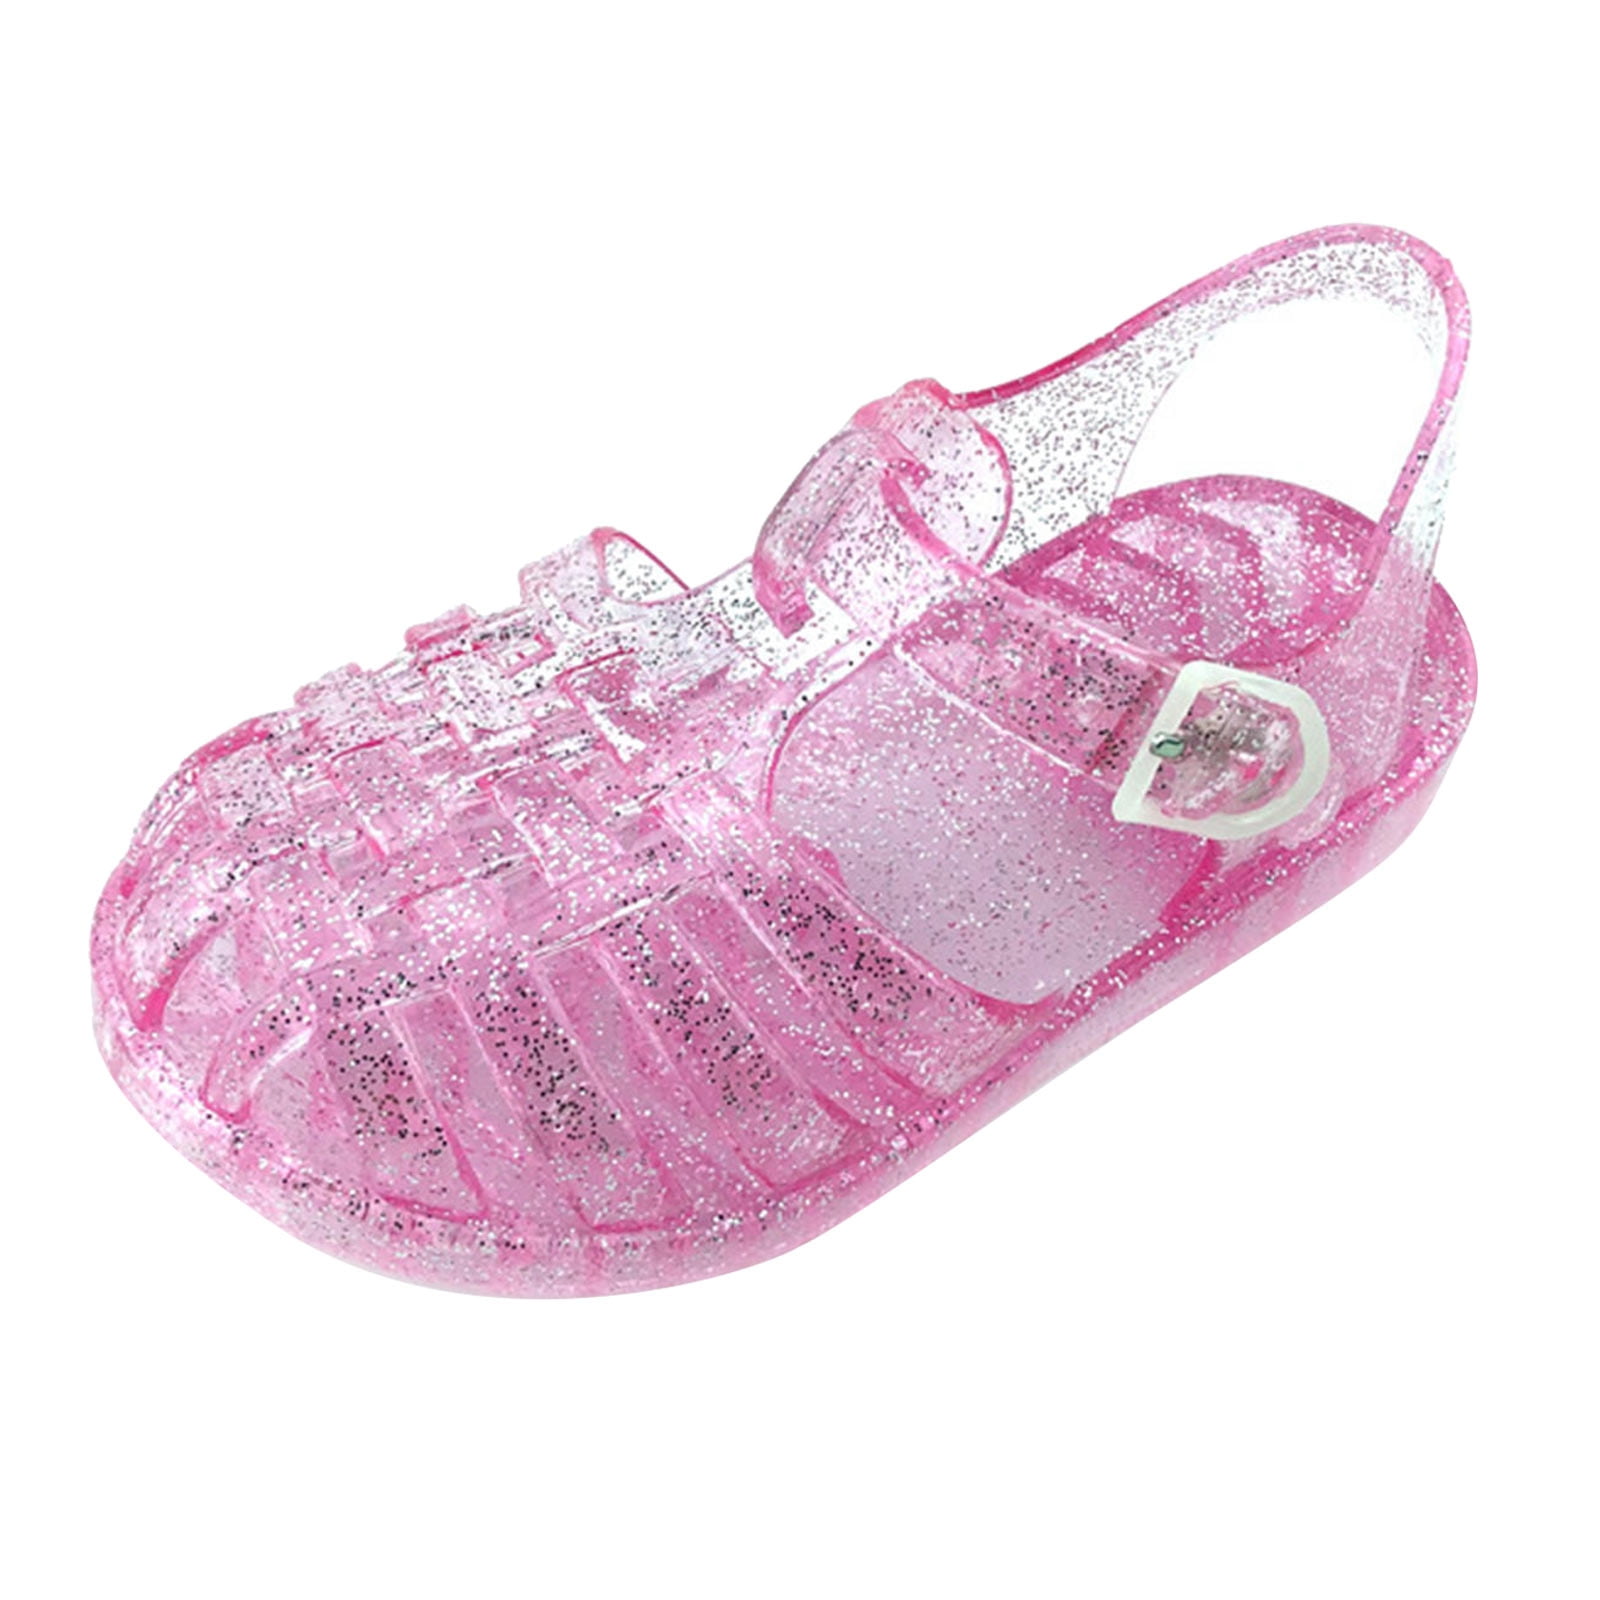 Oalirro - Selected 5 4-8 Years Fabric PVC Shoes Girls Age: Little Kid Beach Closed Years Recommended Sandals Toe